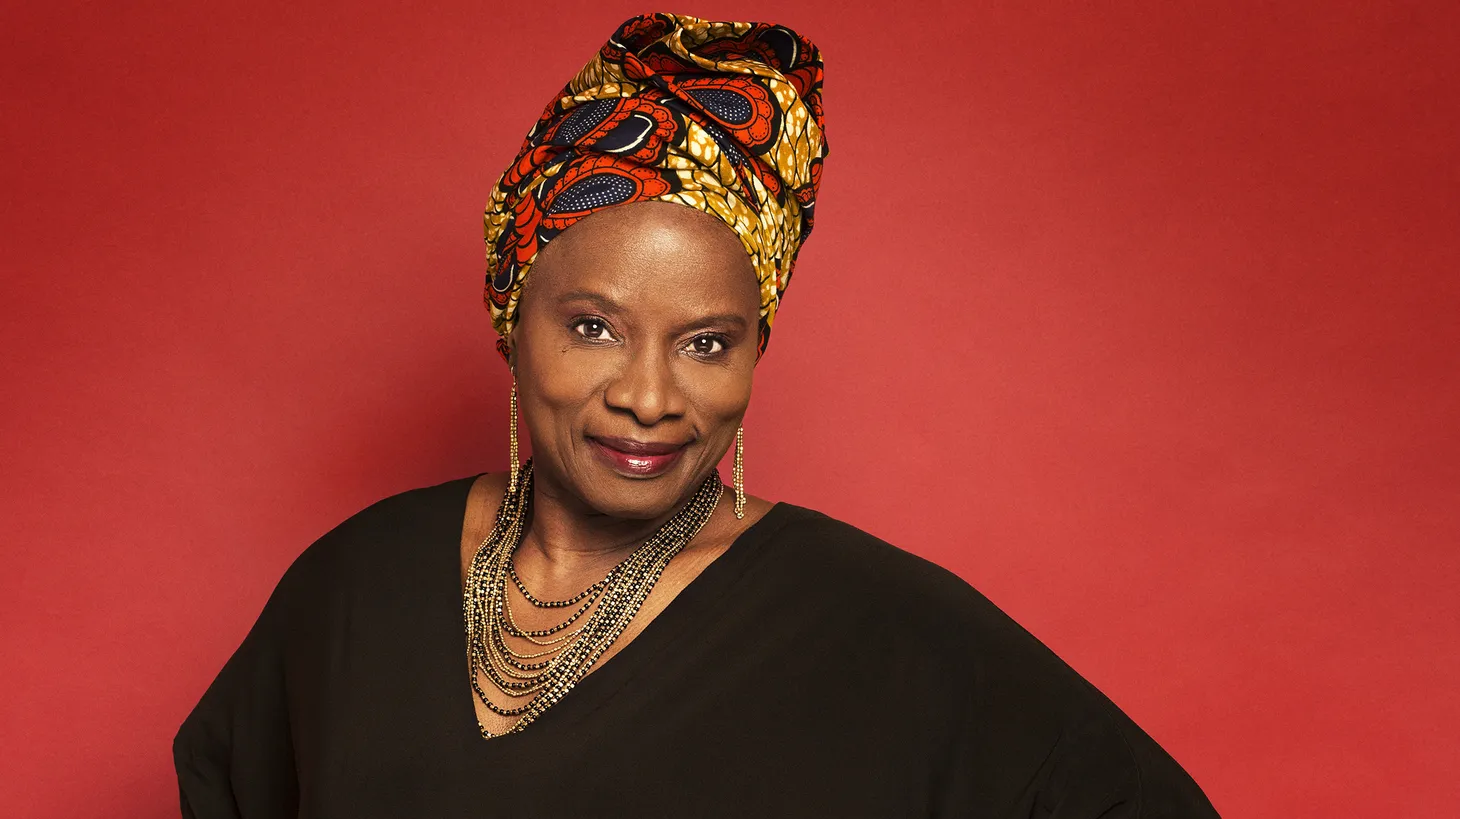 “Music is a gift to all of us. It’s the only language that we all speak across this planet,” says Angélique Kidjo who is set to perform at the Hollywood Bowl on September 14. “Every time I'm on stage, I'm humbled, I feel small and thankful and grateful that I have a talent to be able to sing to many different people from every walk of life.”